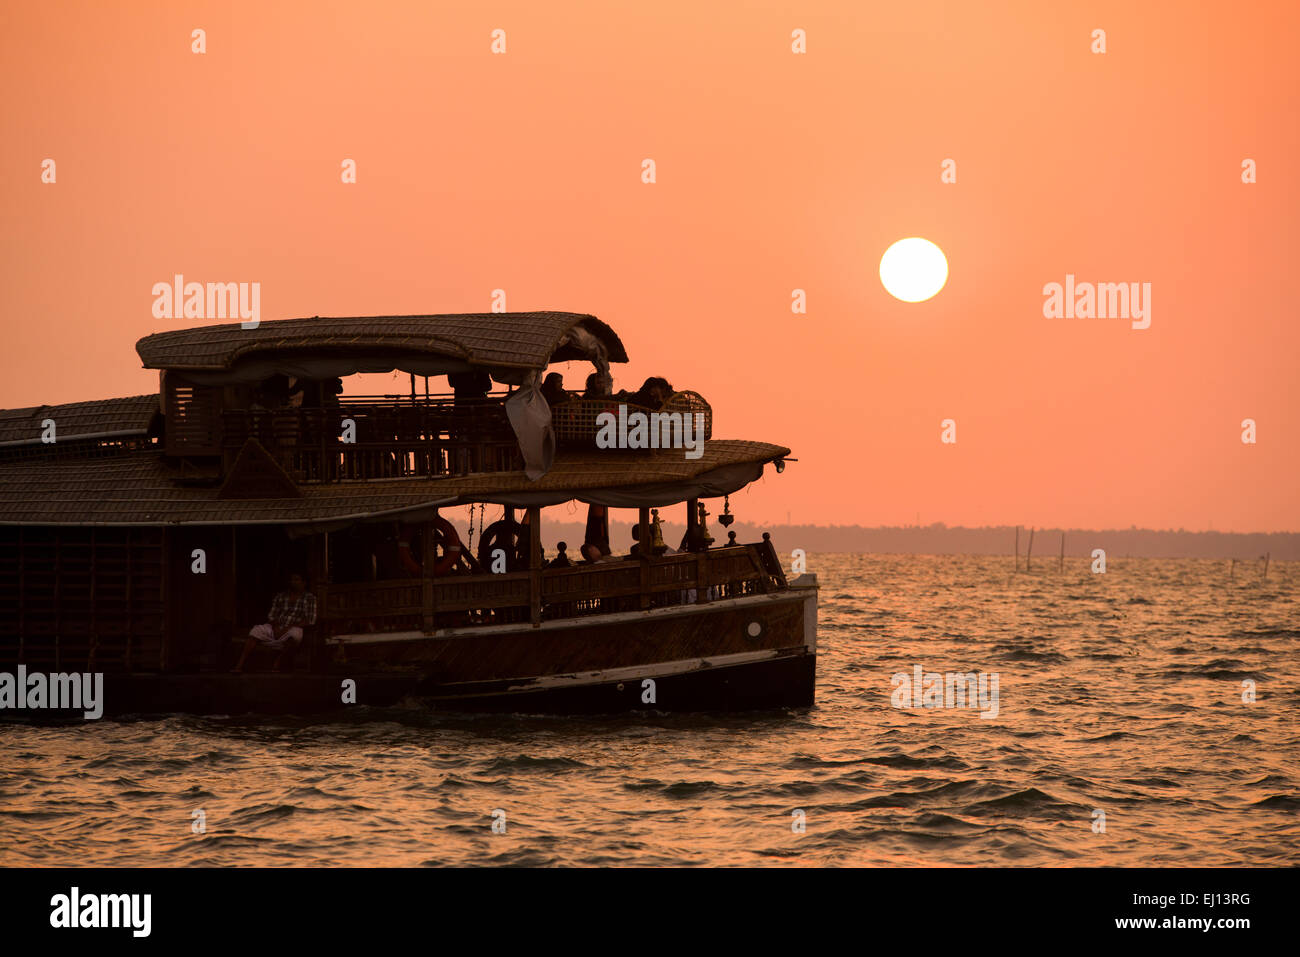 A houseboat in silhouette at sunset on the Vembanad Lake in Kumarakom, Kerala India Stock Photo